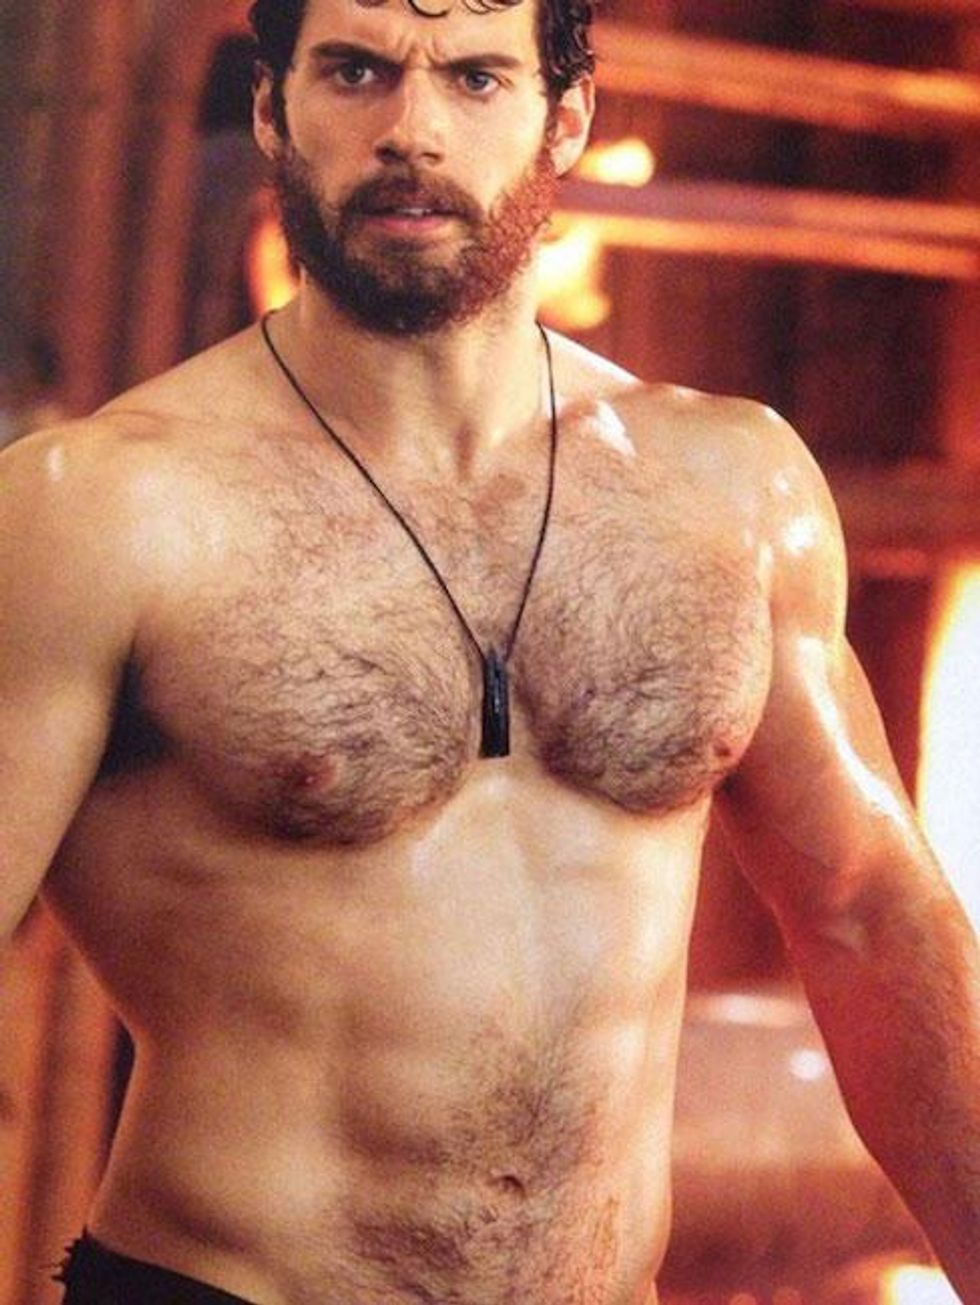 Hairy Chest Gay Porn Stars - Scruff Abounds! Here Are 99 Hairy Chests We Love